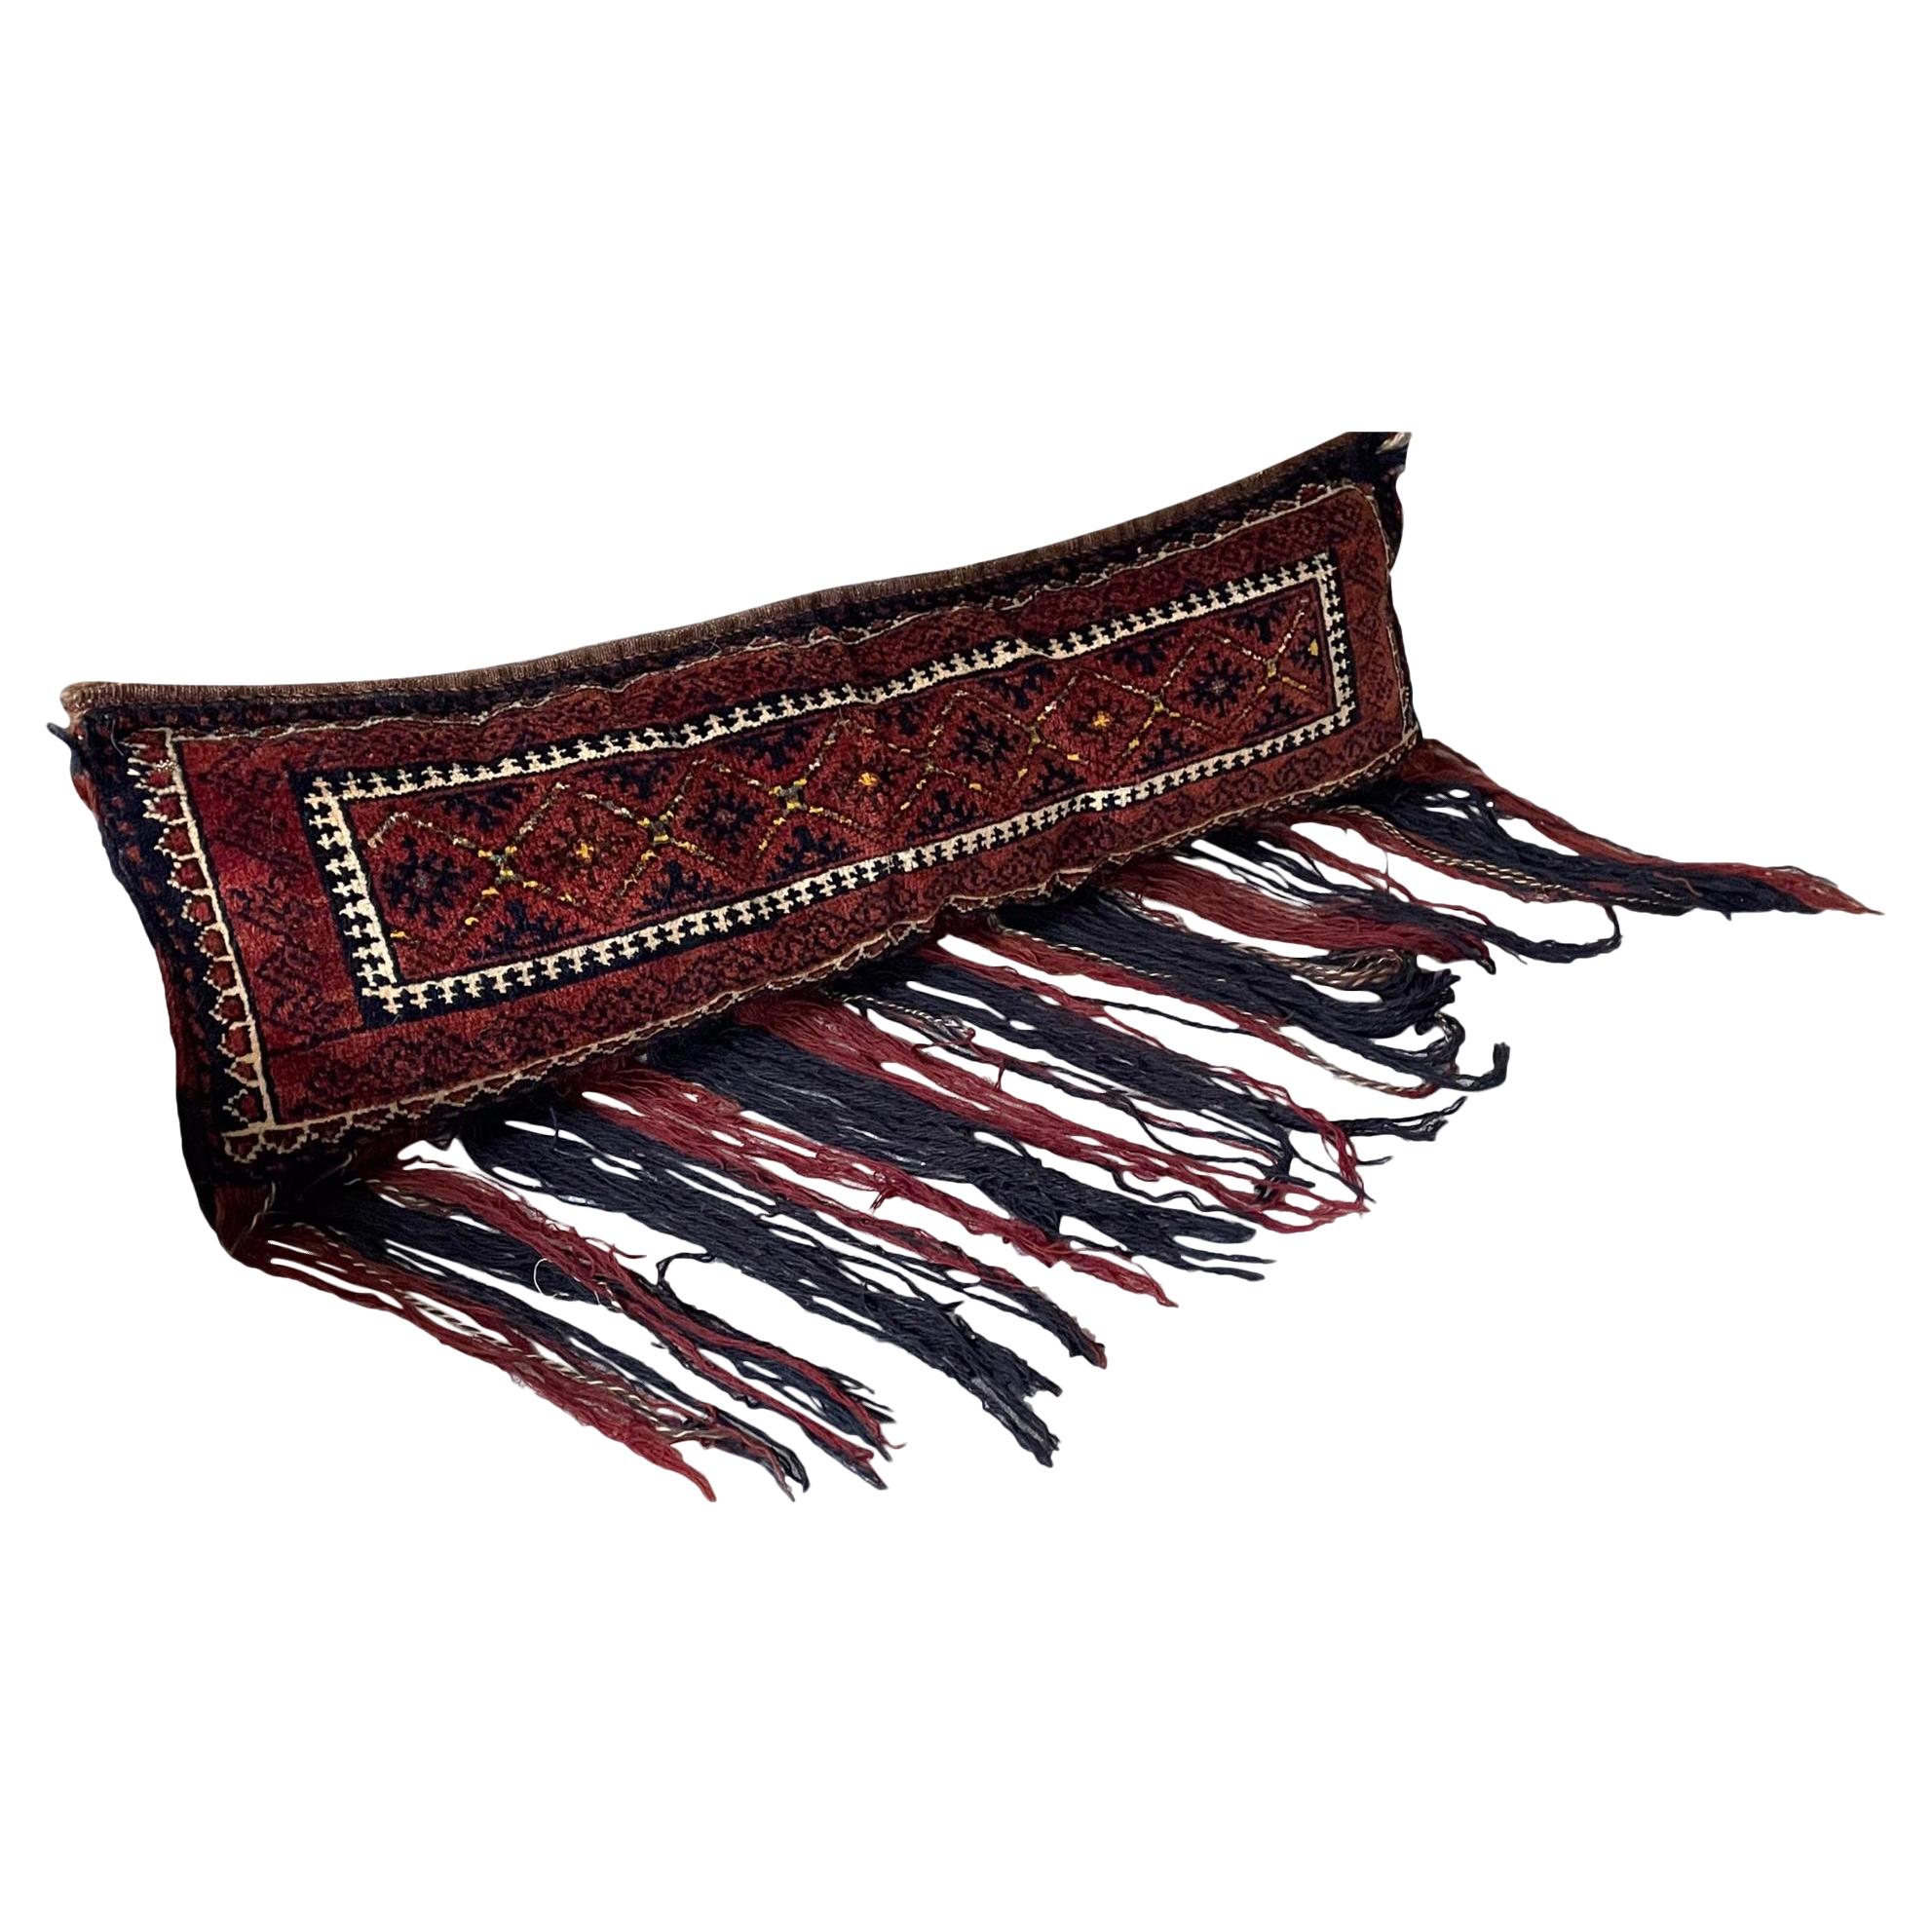 Large Gypsy Oriental Salt Bag or Rug Embroidery Pillow For Sale